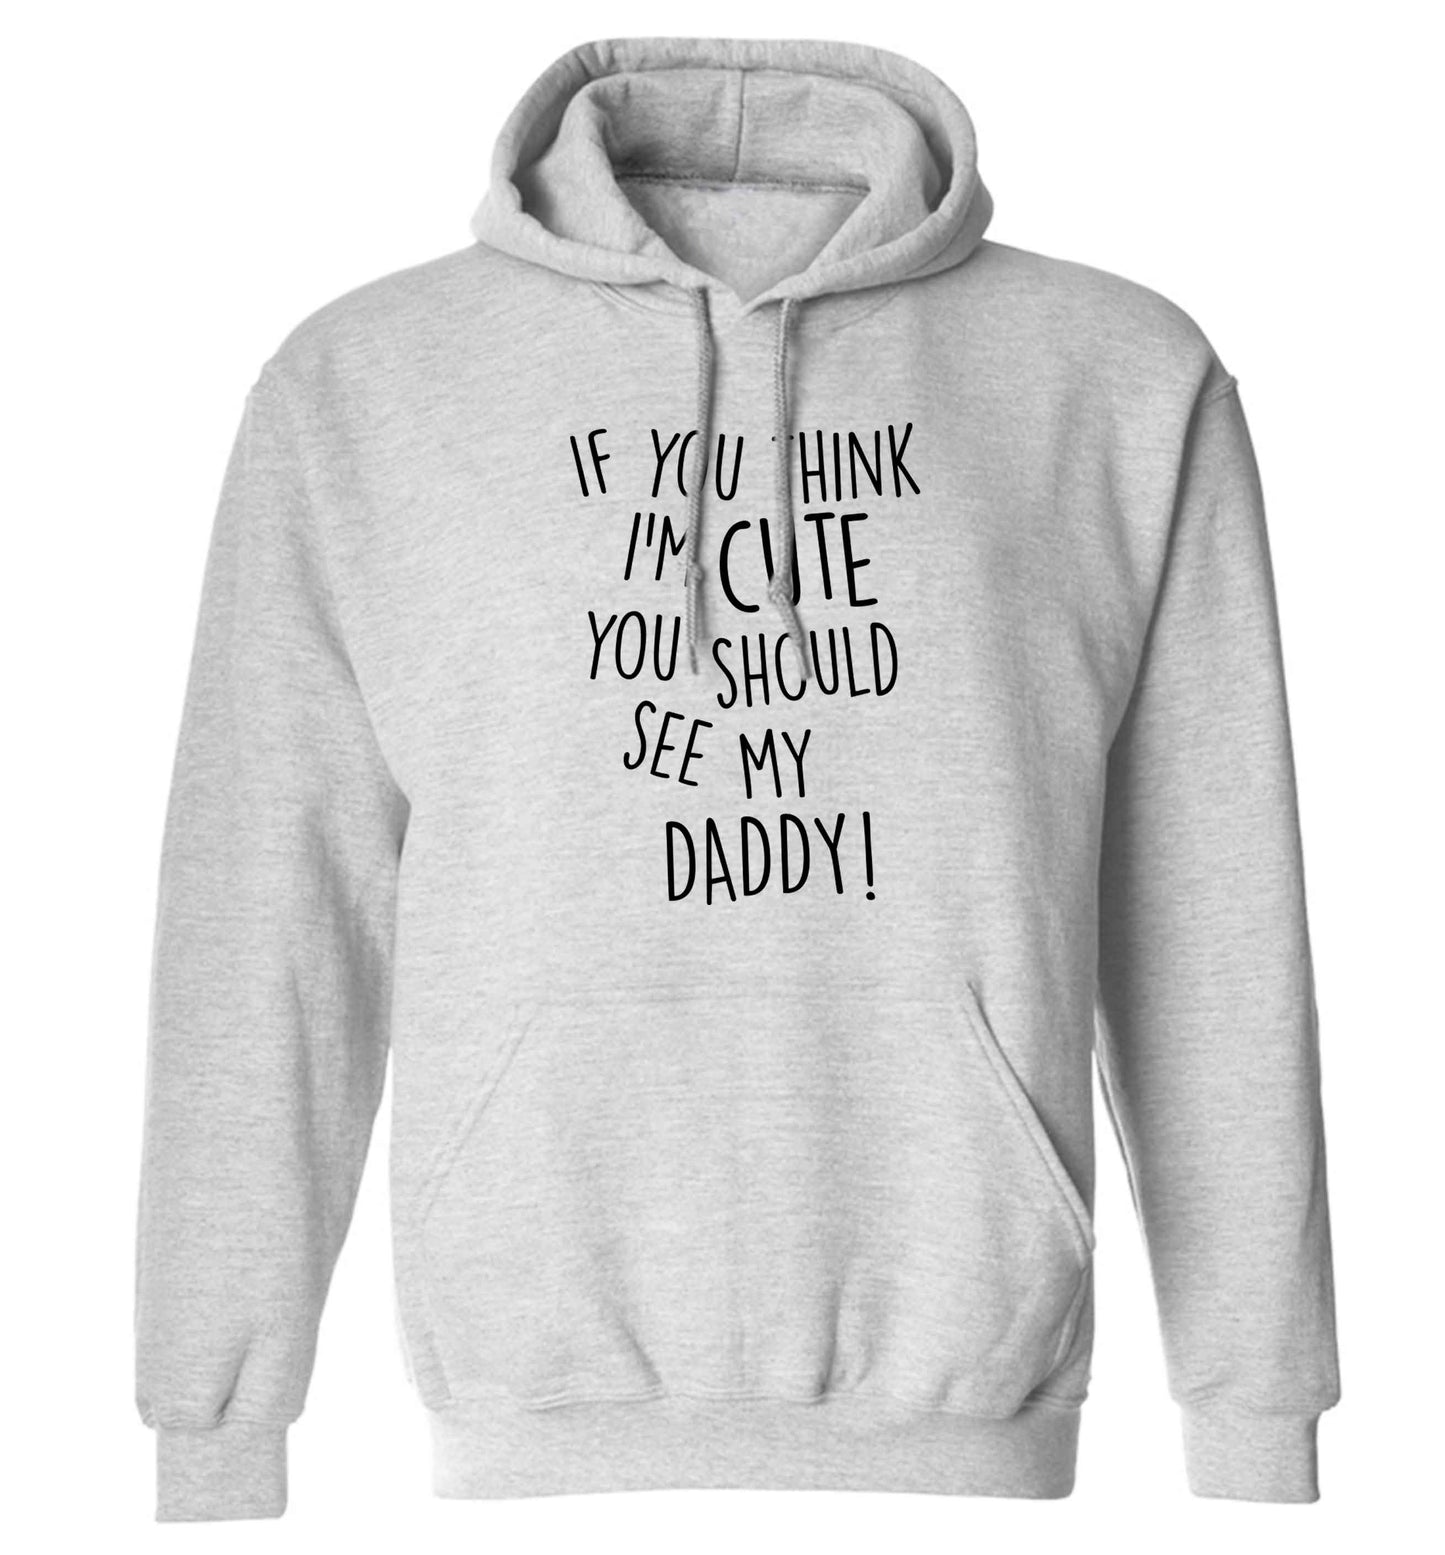 If you think I'm cute you should see my daddy adults unisex grey hoodie 2XL